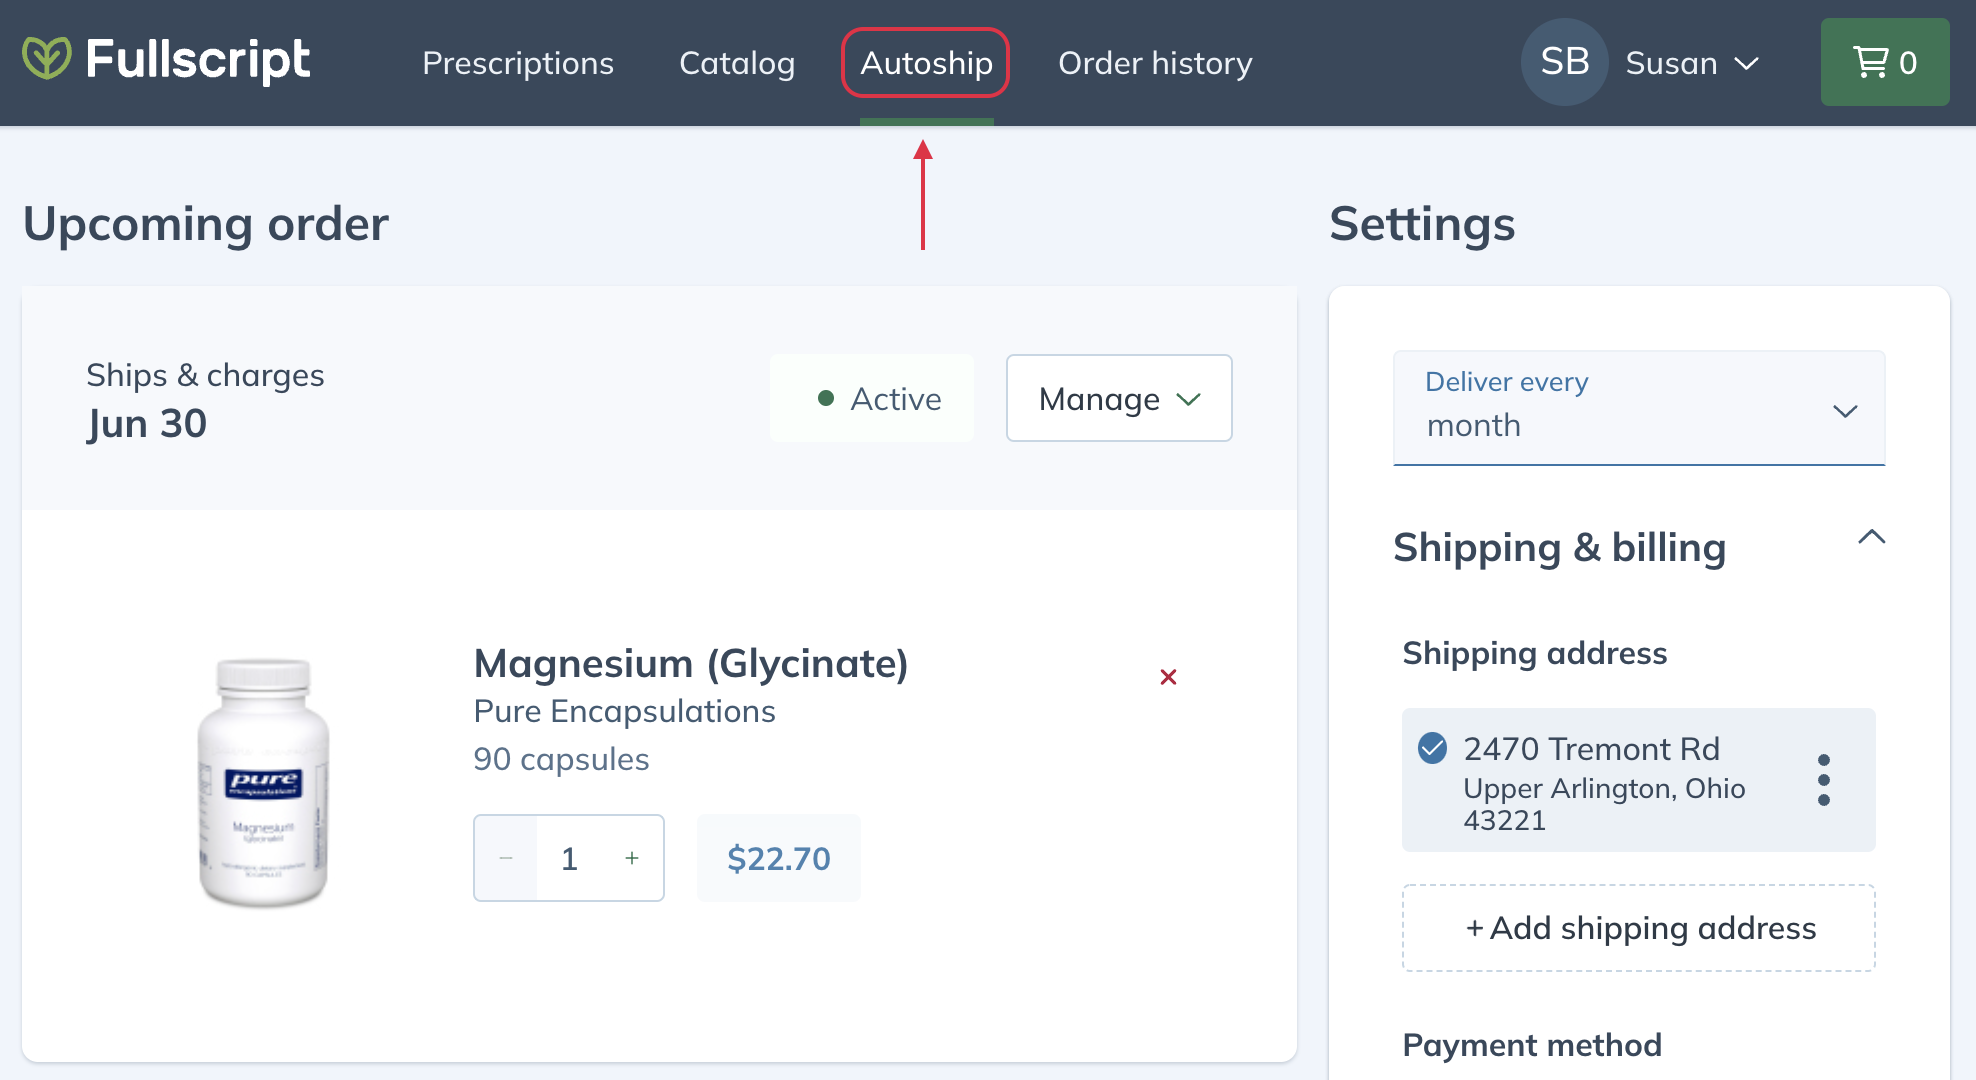 Schedule and manage autoshipments of your go-to products from the Autoship page